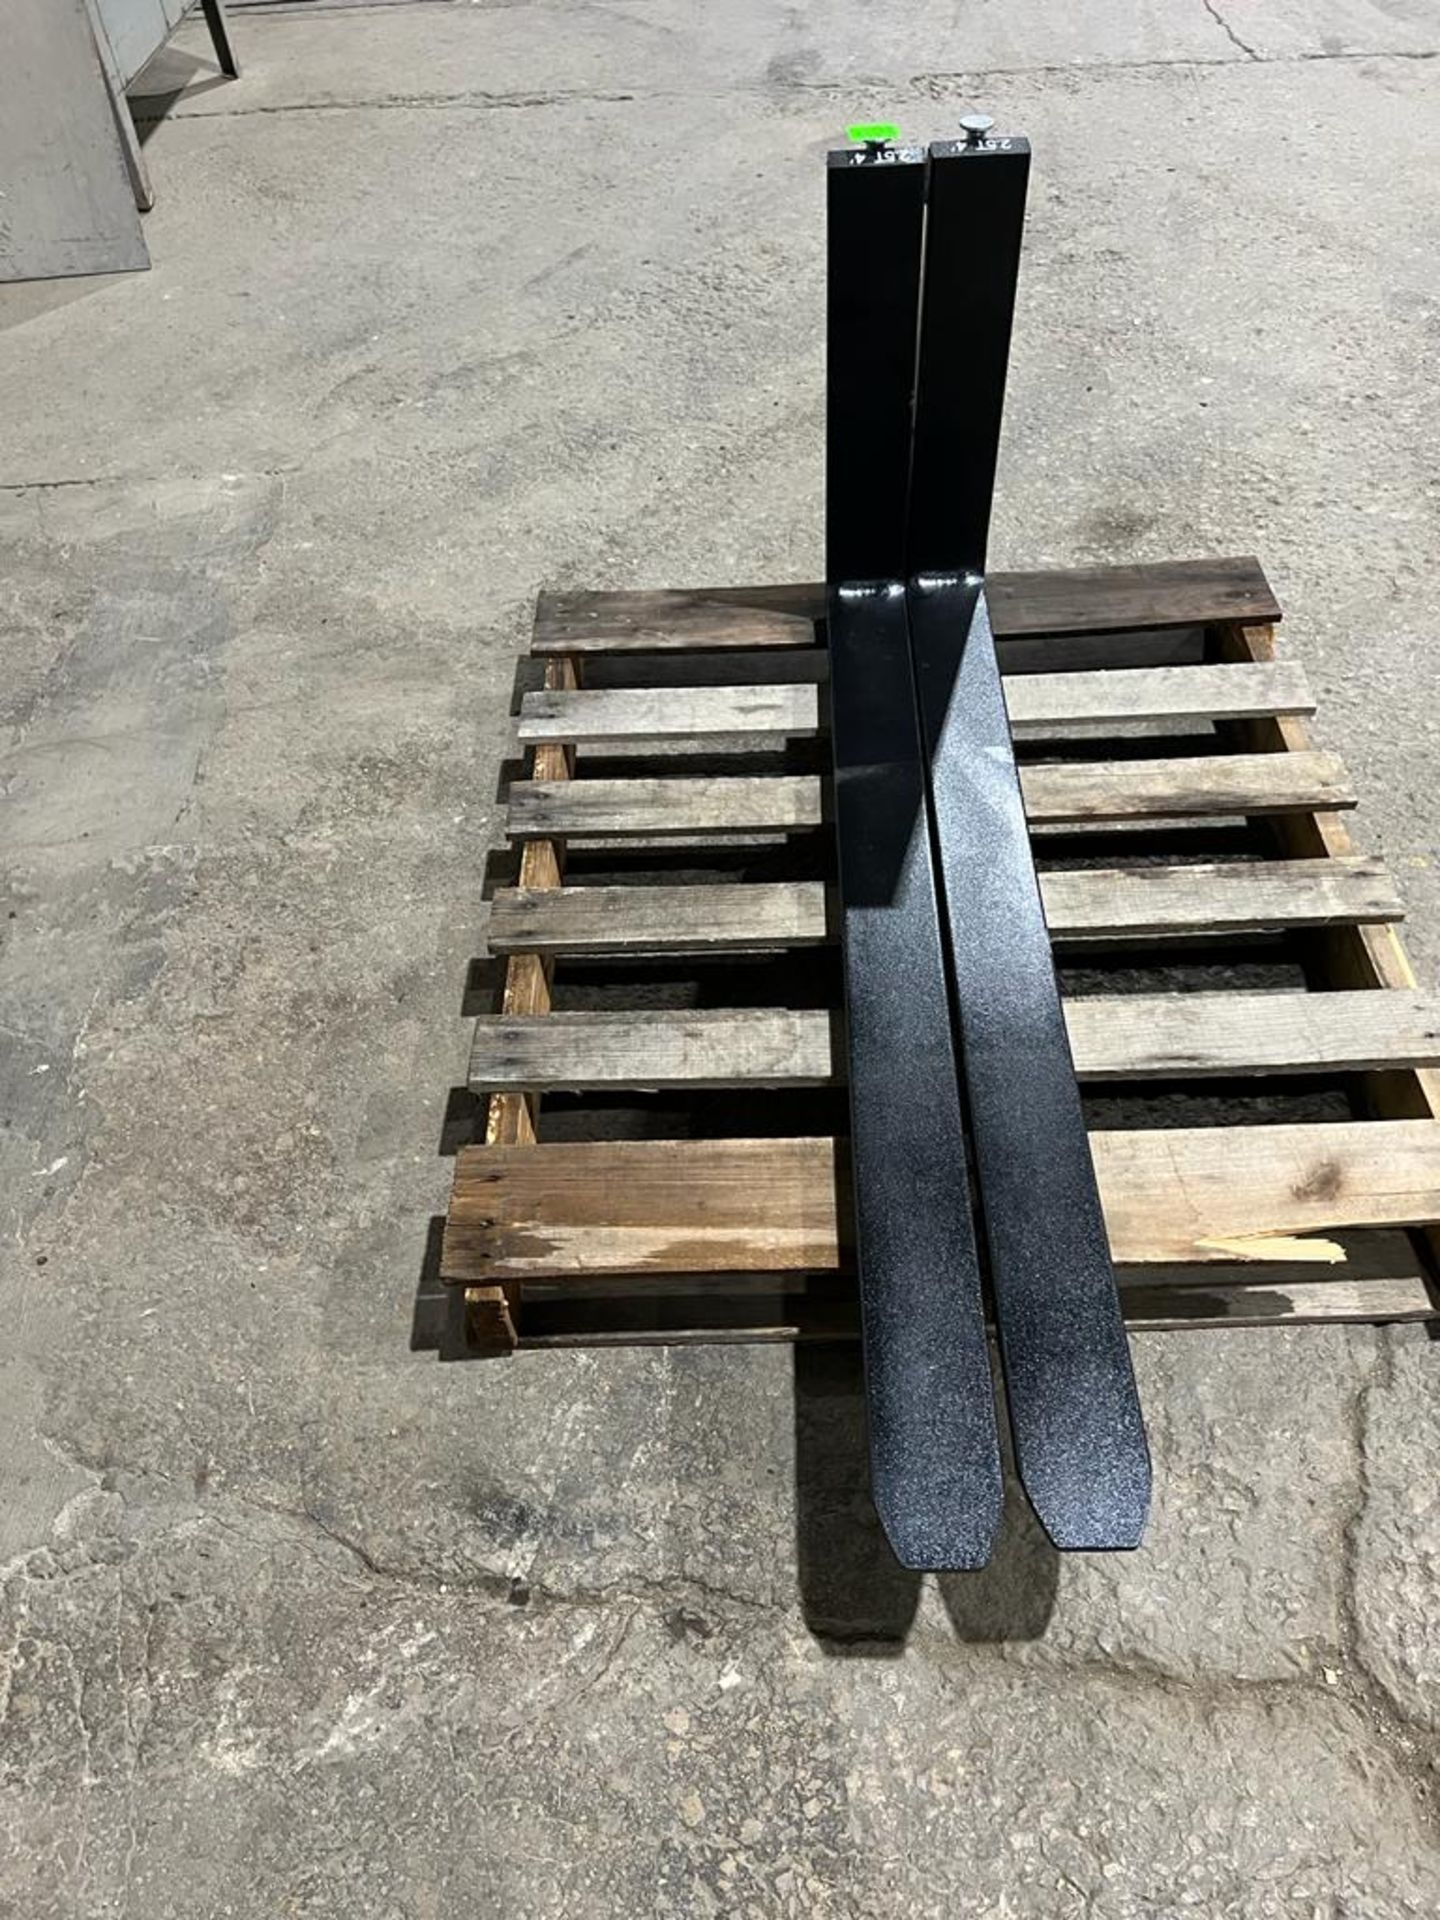 BRAND NEW Forklift Forks 48" / 4 feet Long CLASS 2 set of 2 - 2.5 Ton Capacity - Image 2 of 2